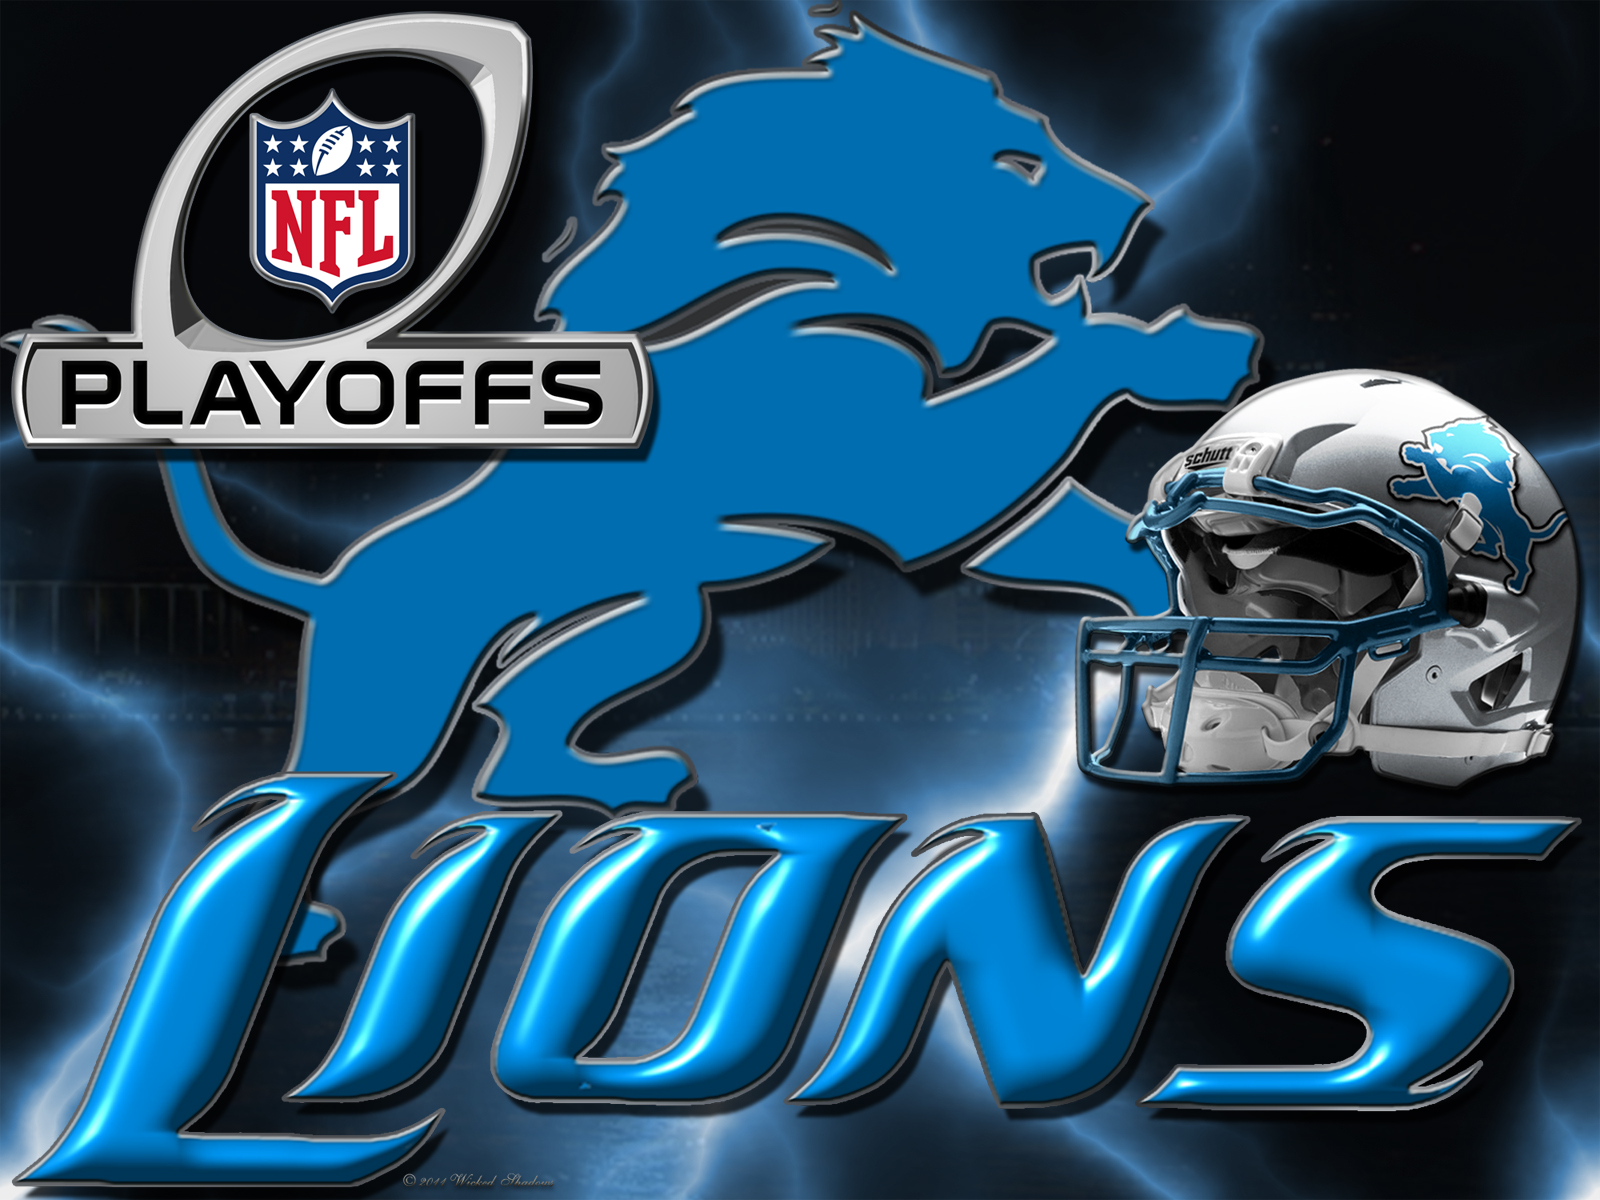 Wallpapers By Wicked Shadows Detroit Lions 2012 Playoffs Wallpaper